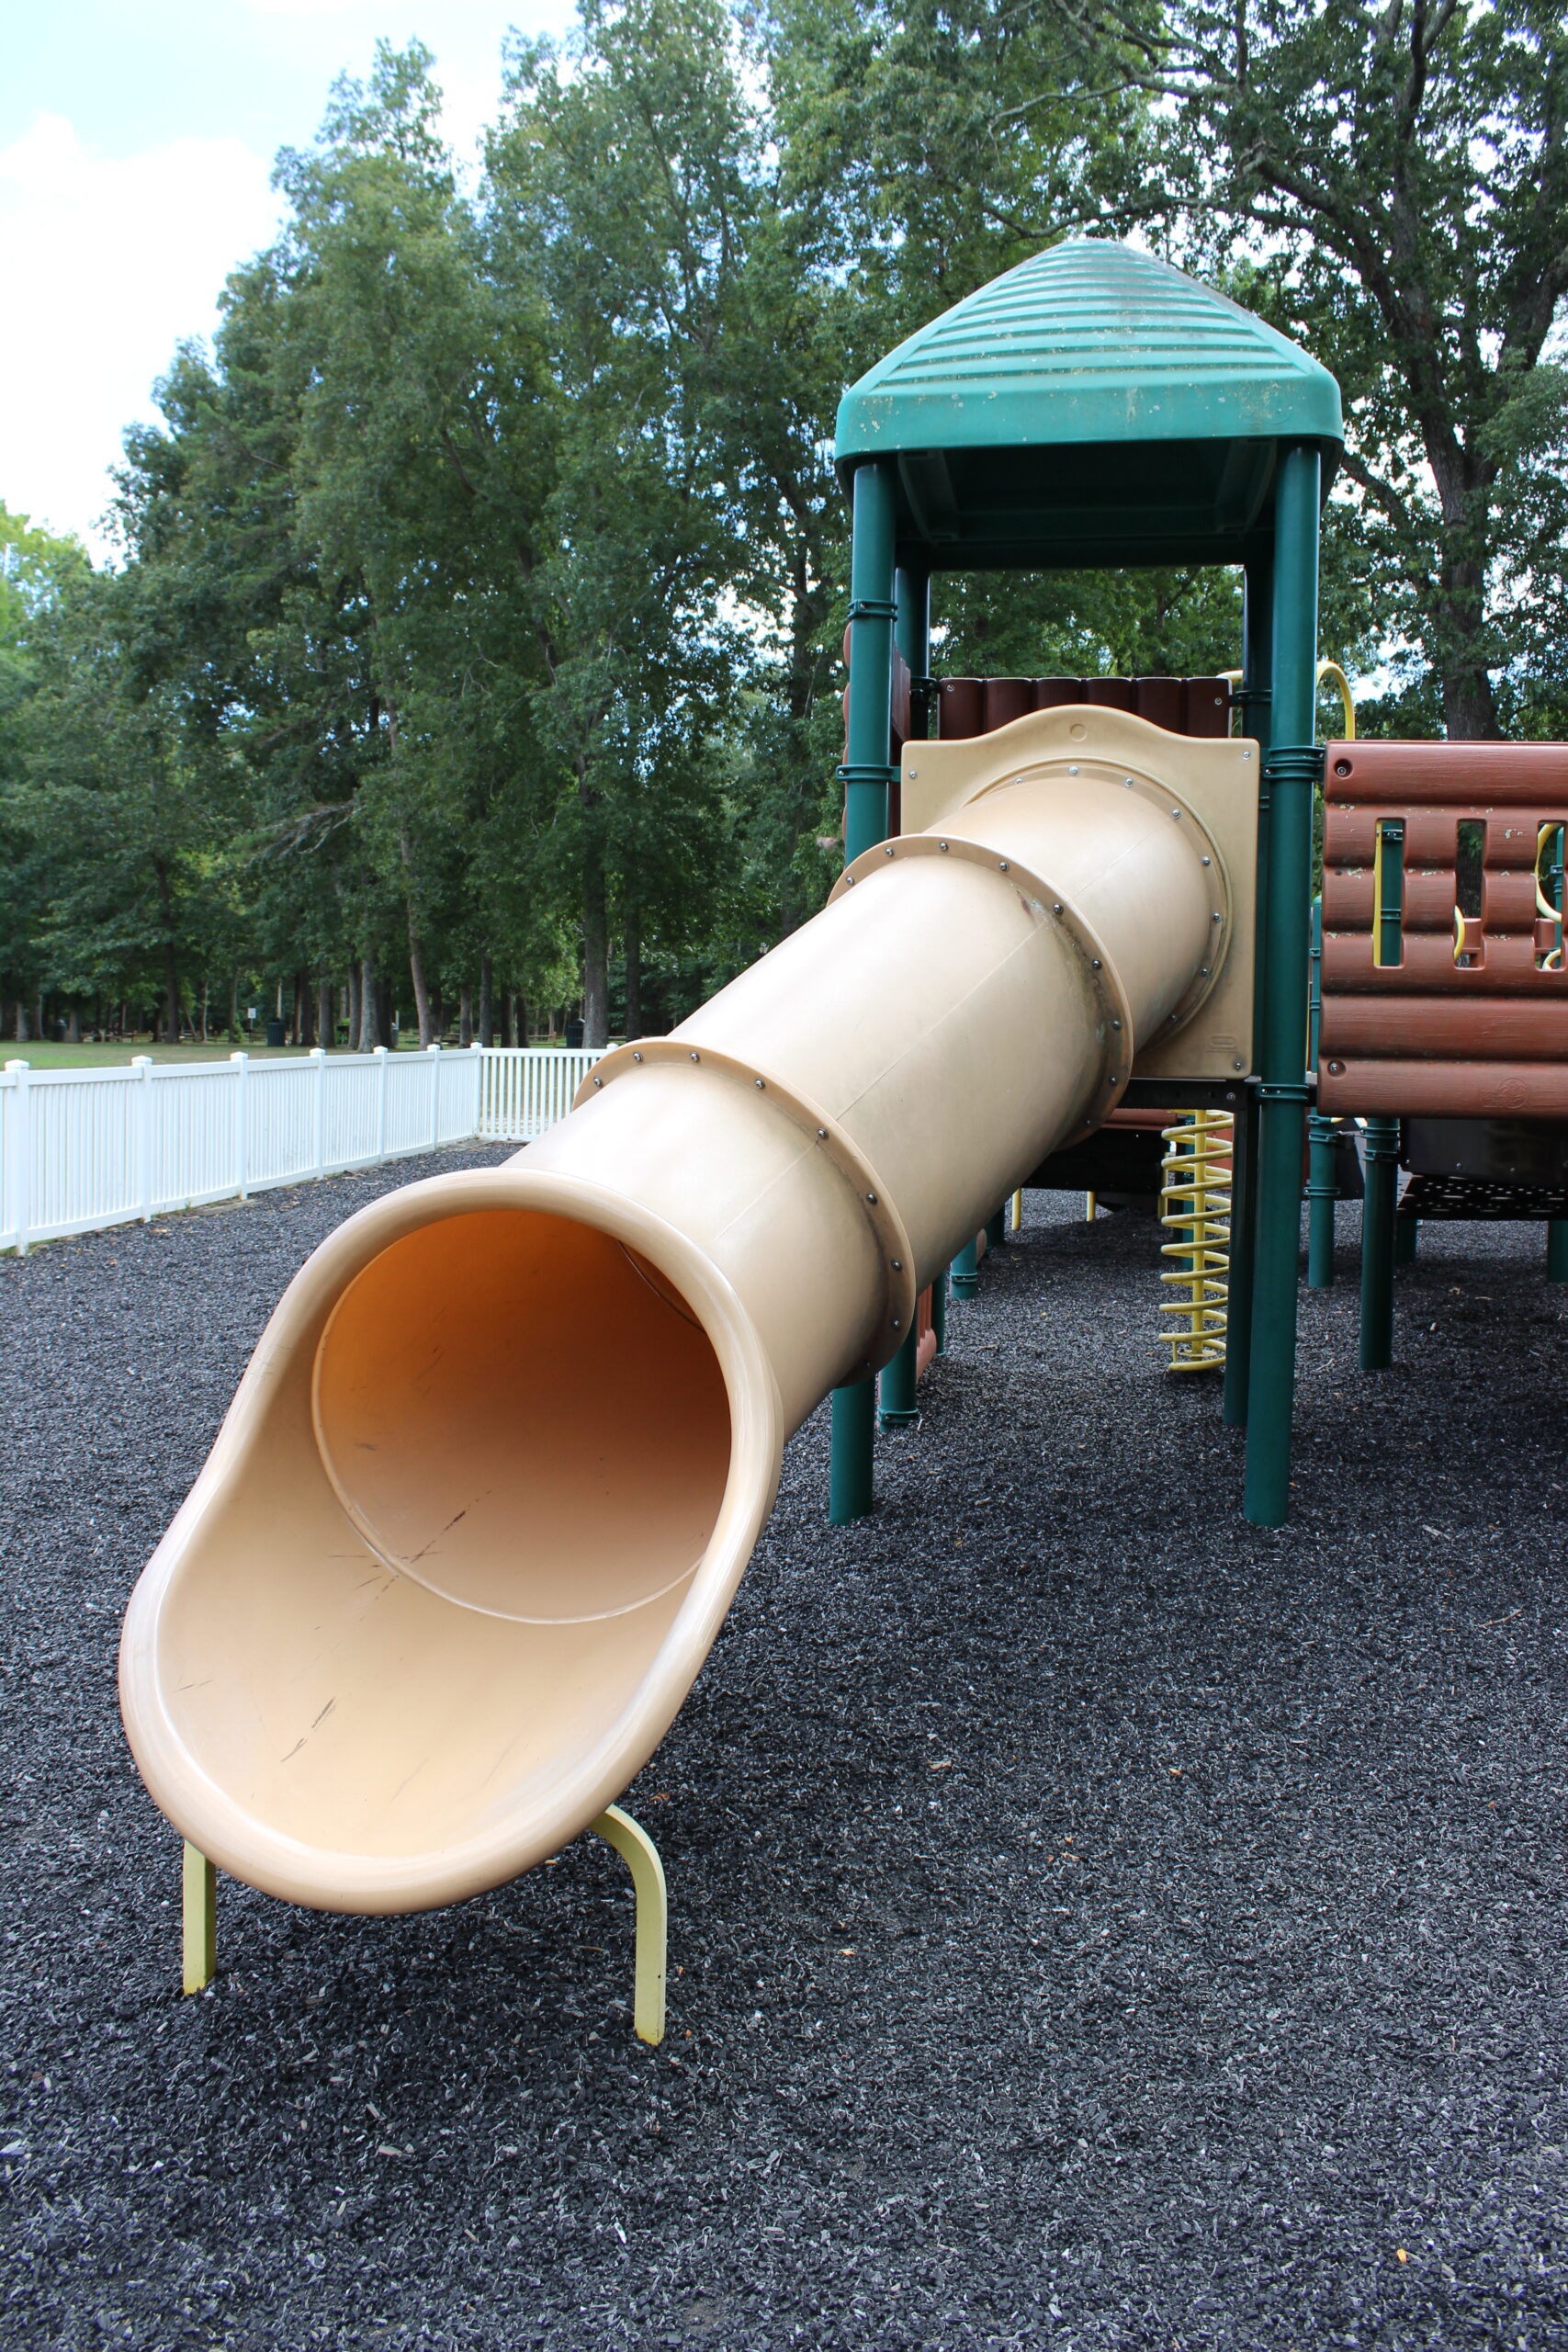 Front Estell Manor Park Playgrounds in Mays Landing NJ - SLIDES - tunnel straight slide on log cabin playground TALL image